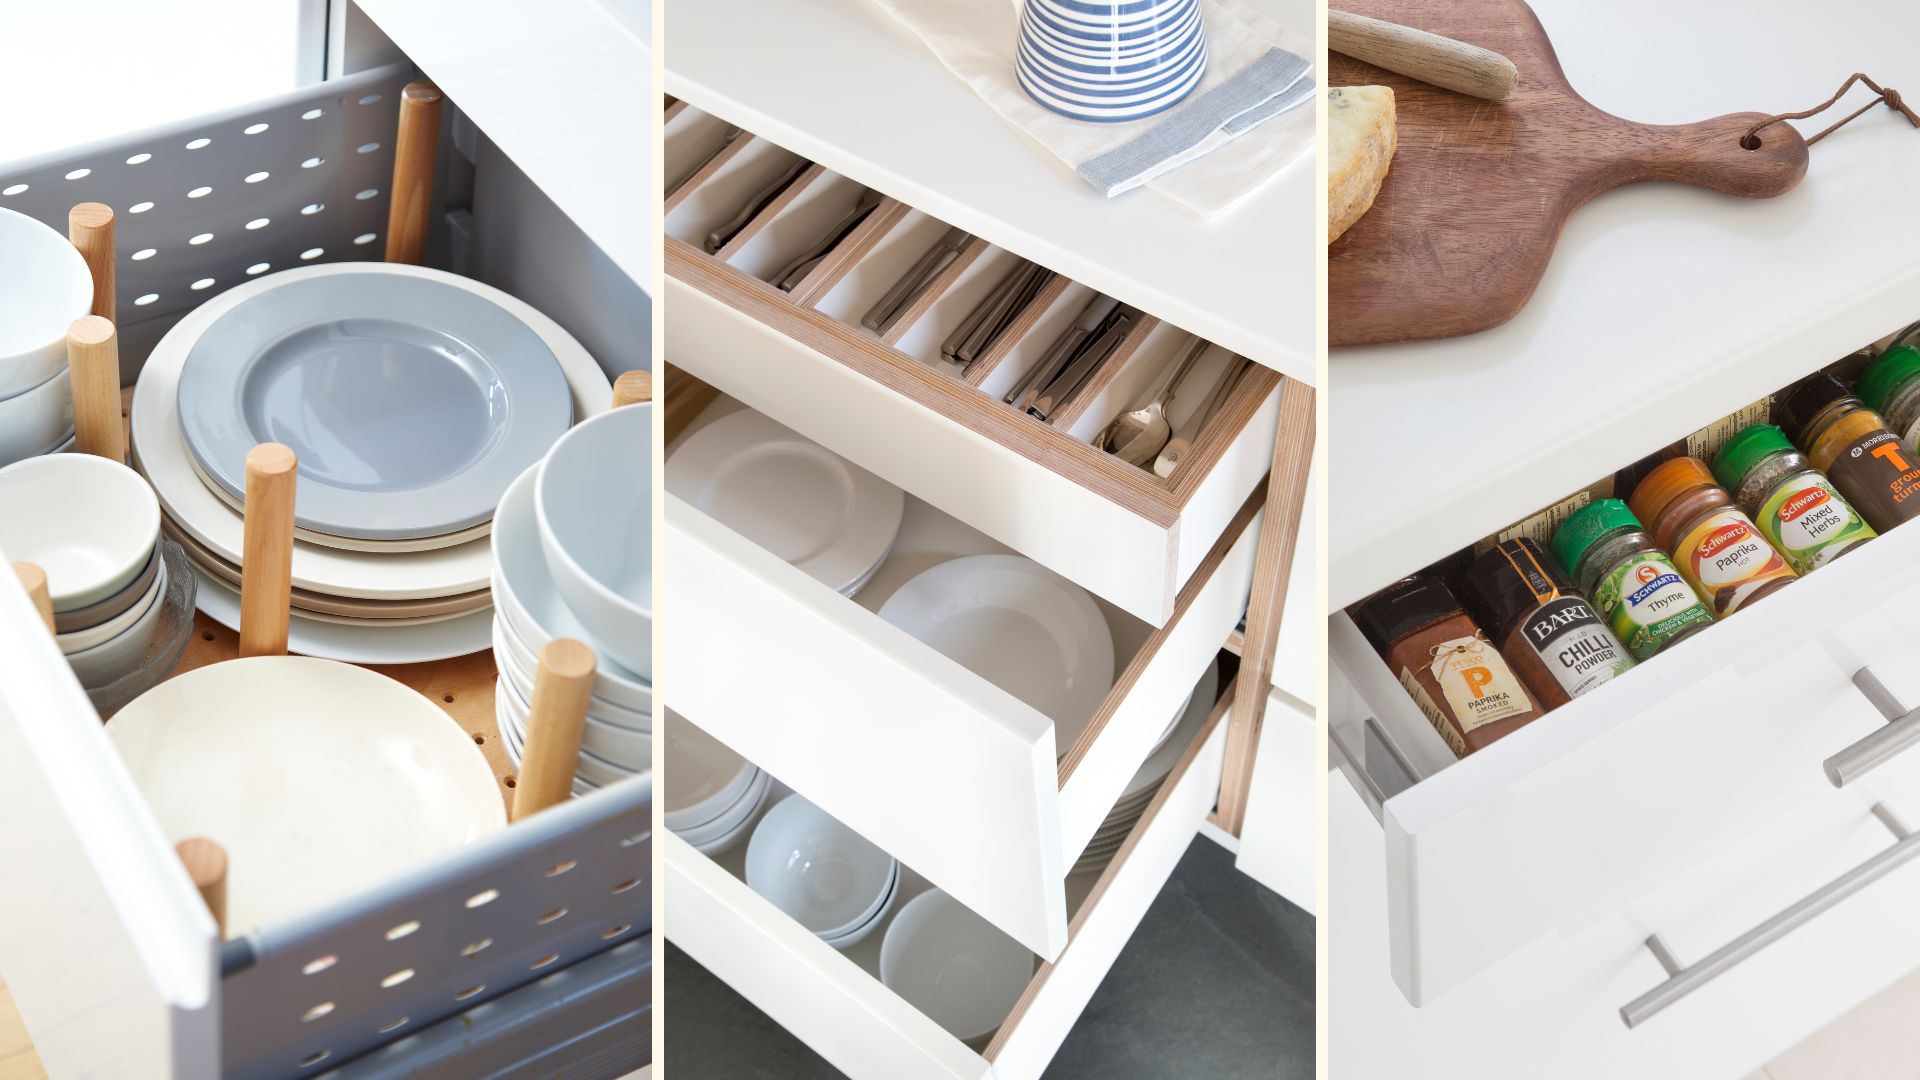 Kitchen Drawers & Shelves – Keep Your Cabinets Organized - IKEA